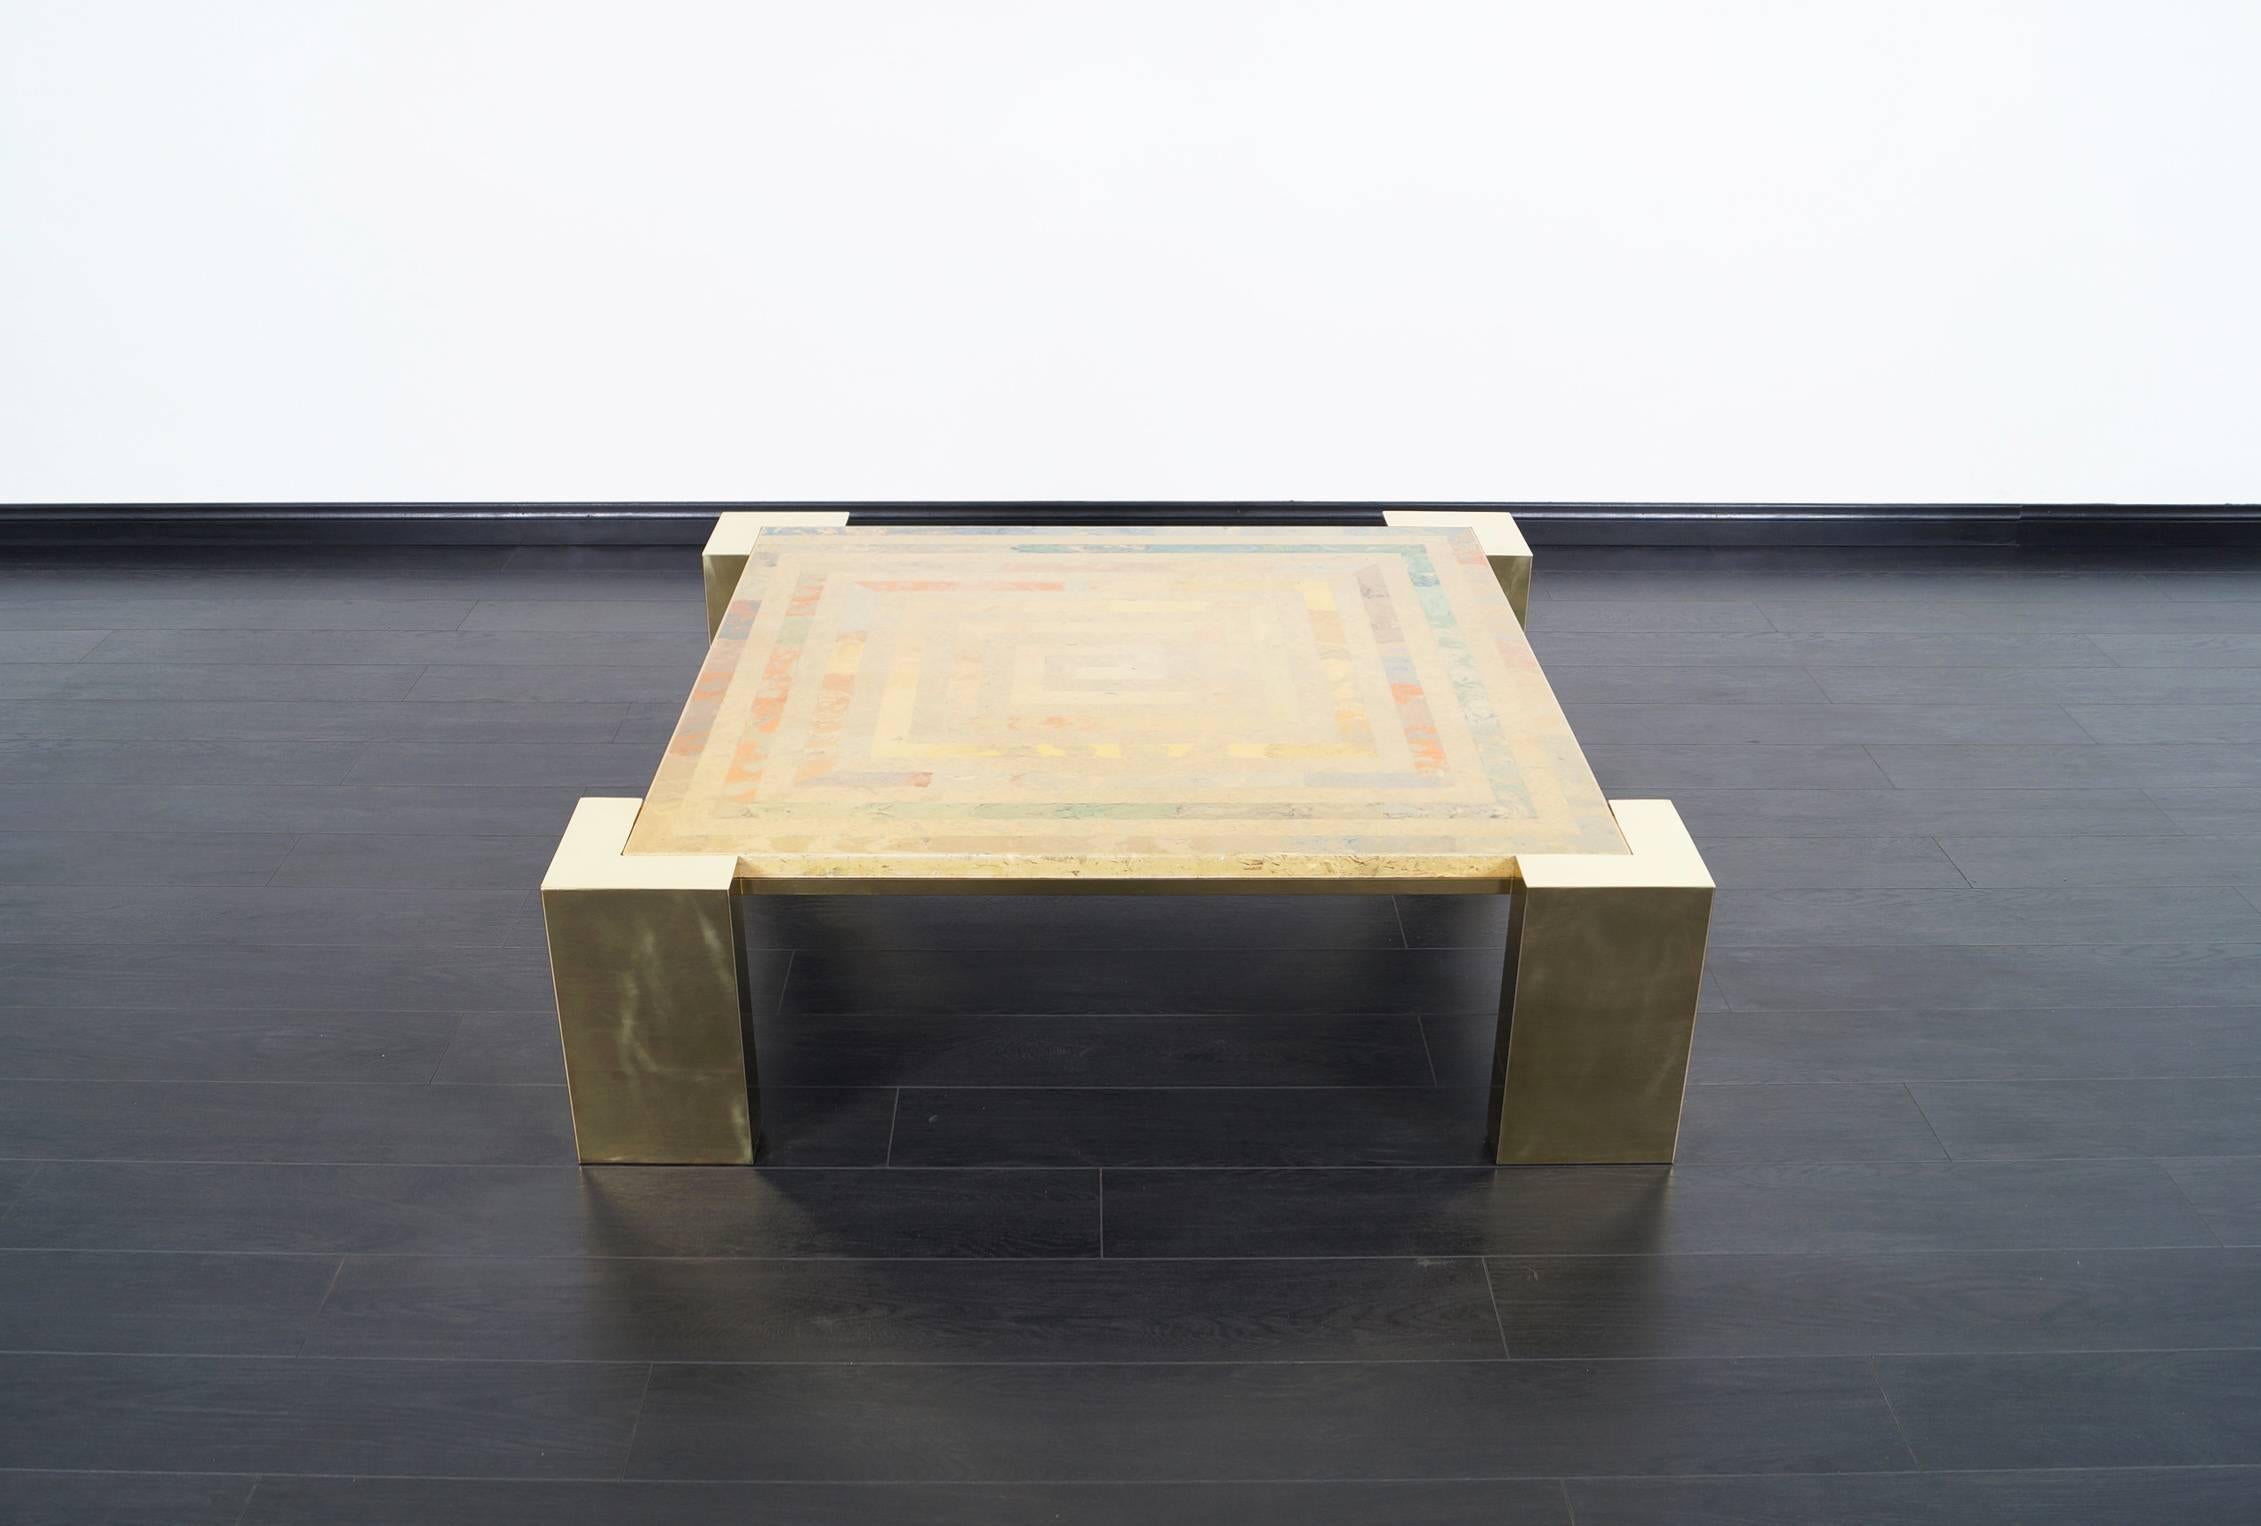 This stunning vintage Italian brass coffee table was designed by Marcello Mioni. Features a geometric design in the travertine.